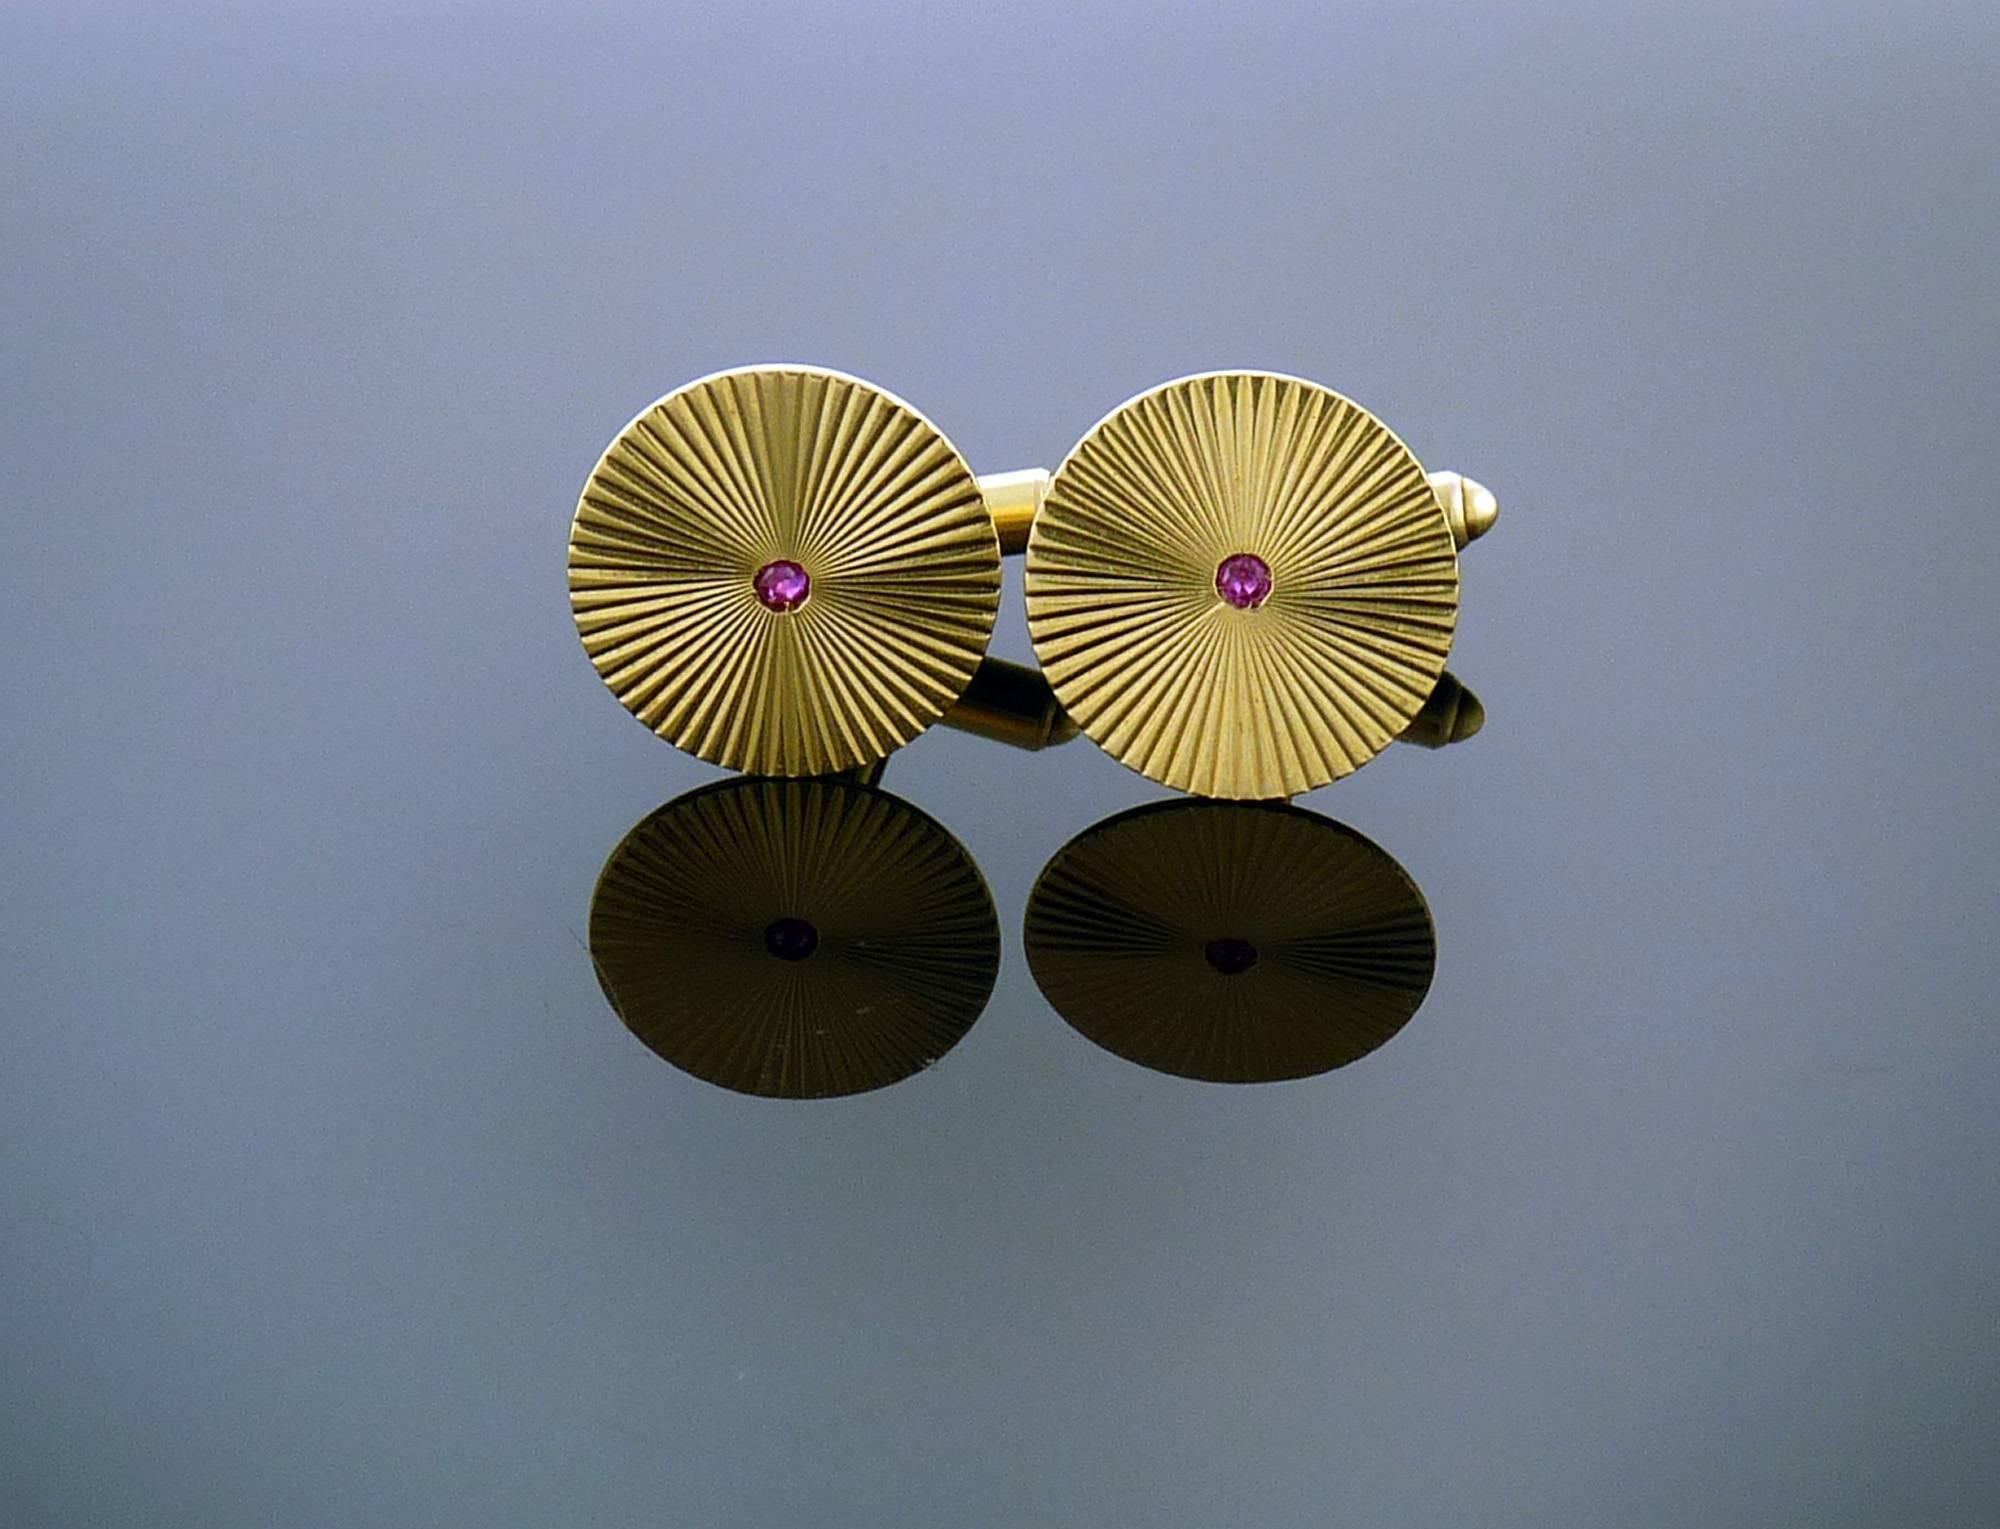 This Stunning Ruby centered Cuff-links are mounted in 14K Yellow Gold.

A perfect touch to any outfit!